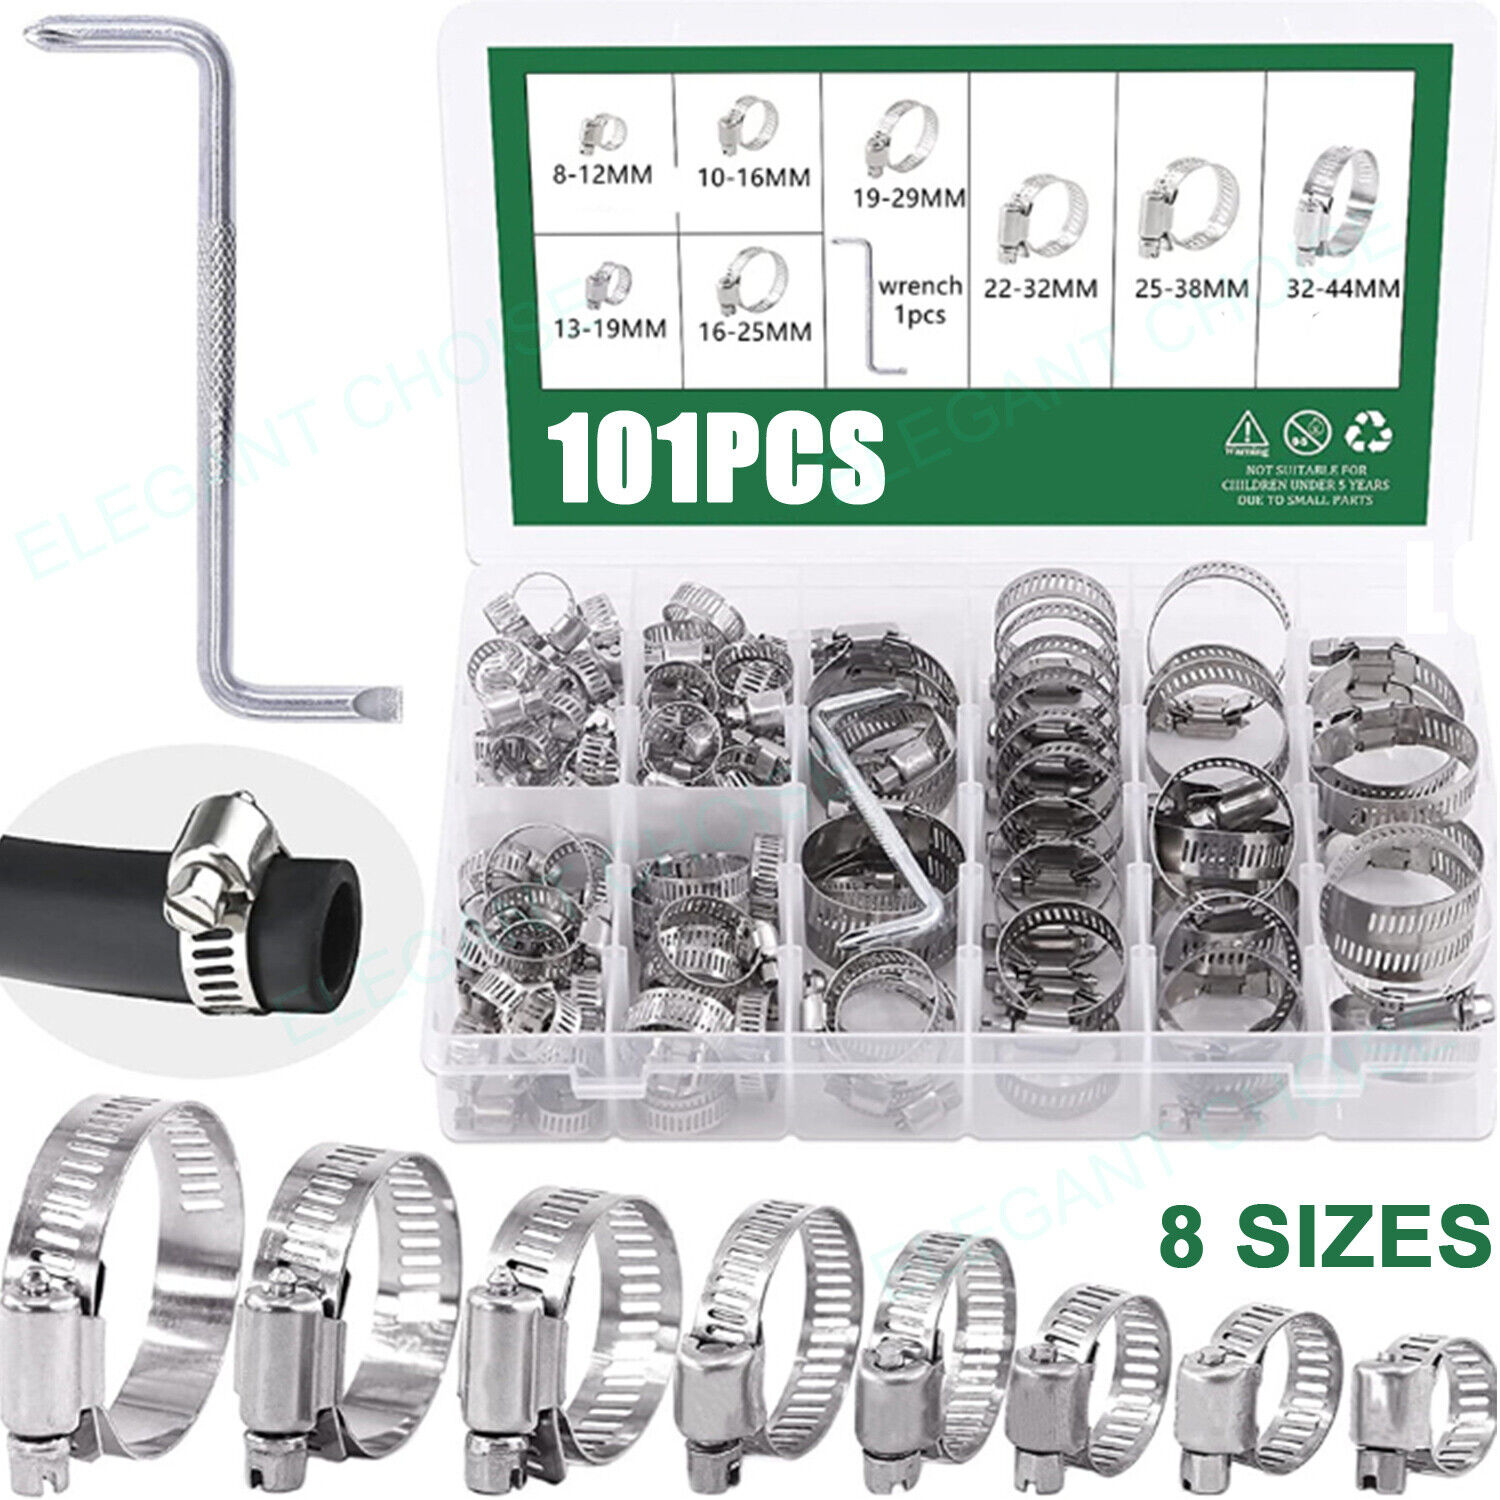 101pcs Adjustable Hose Clamps 8 Sizes Worm Gear Stainless Steel Clamp Assortment